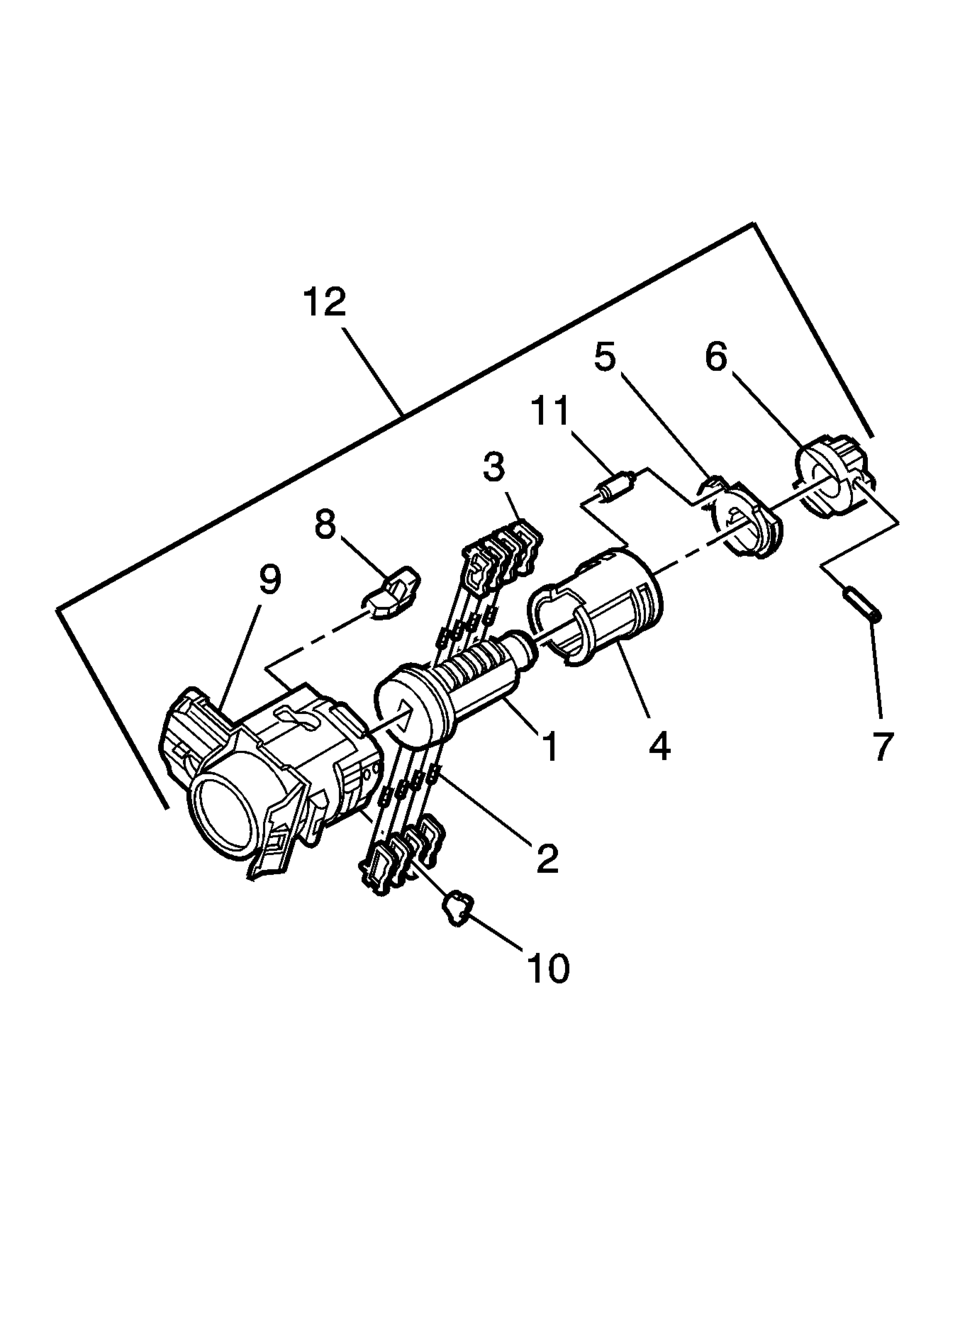 The door lock cylinder uses 8 of the 8 cut positions. The tumbler positions are